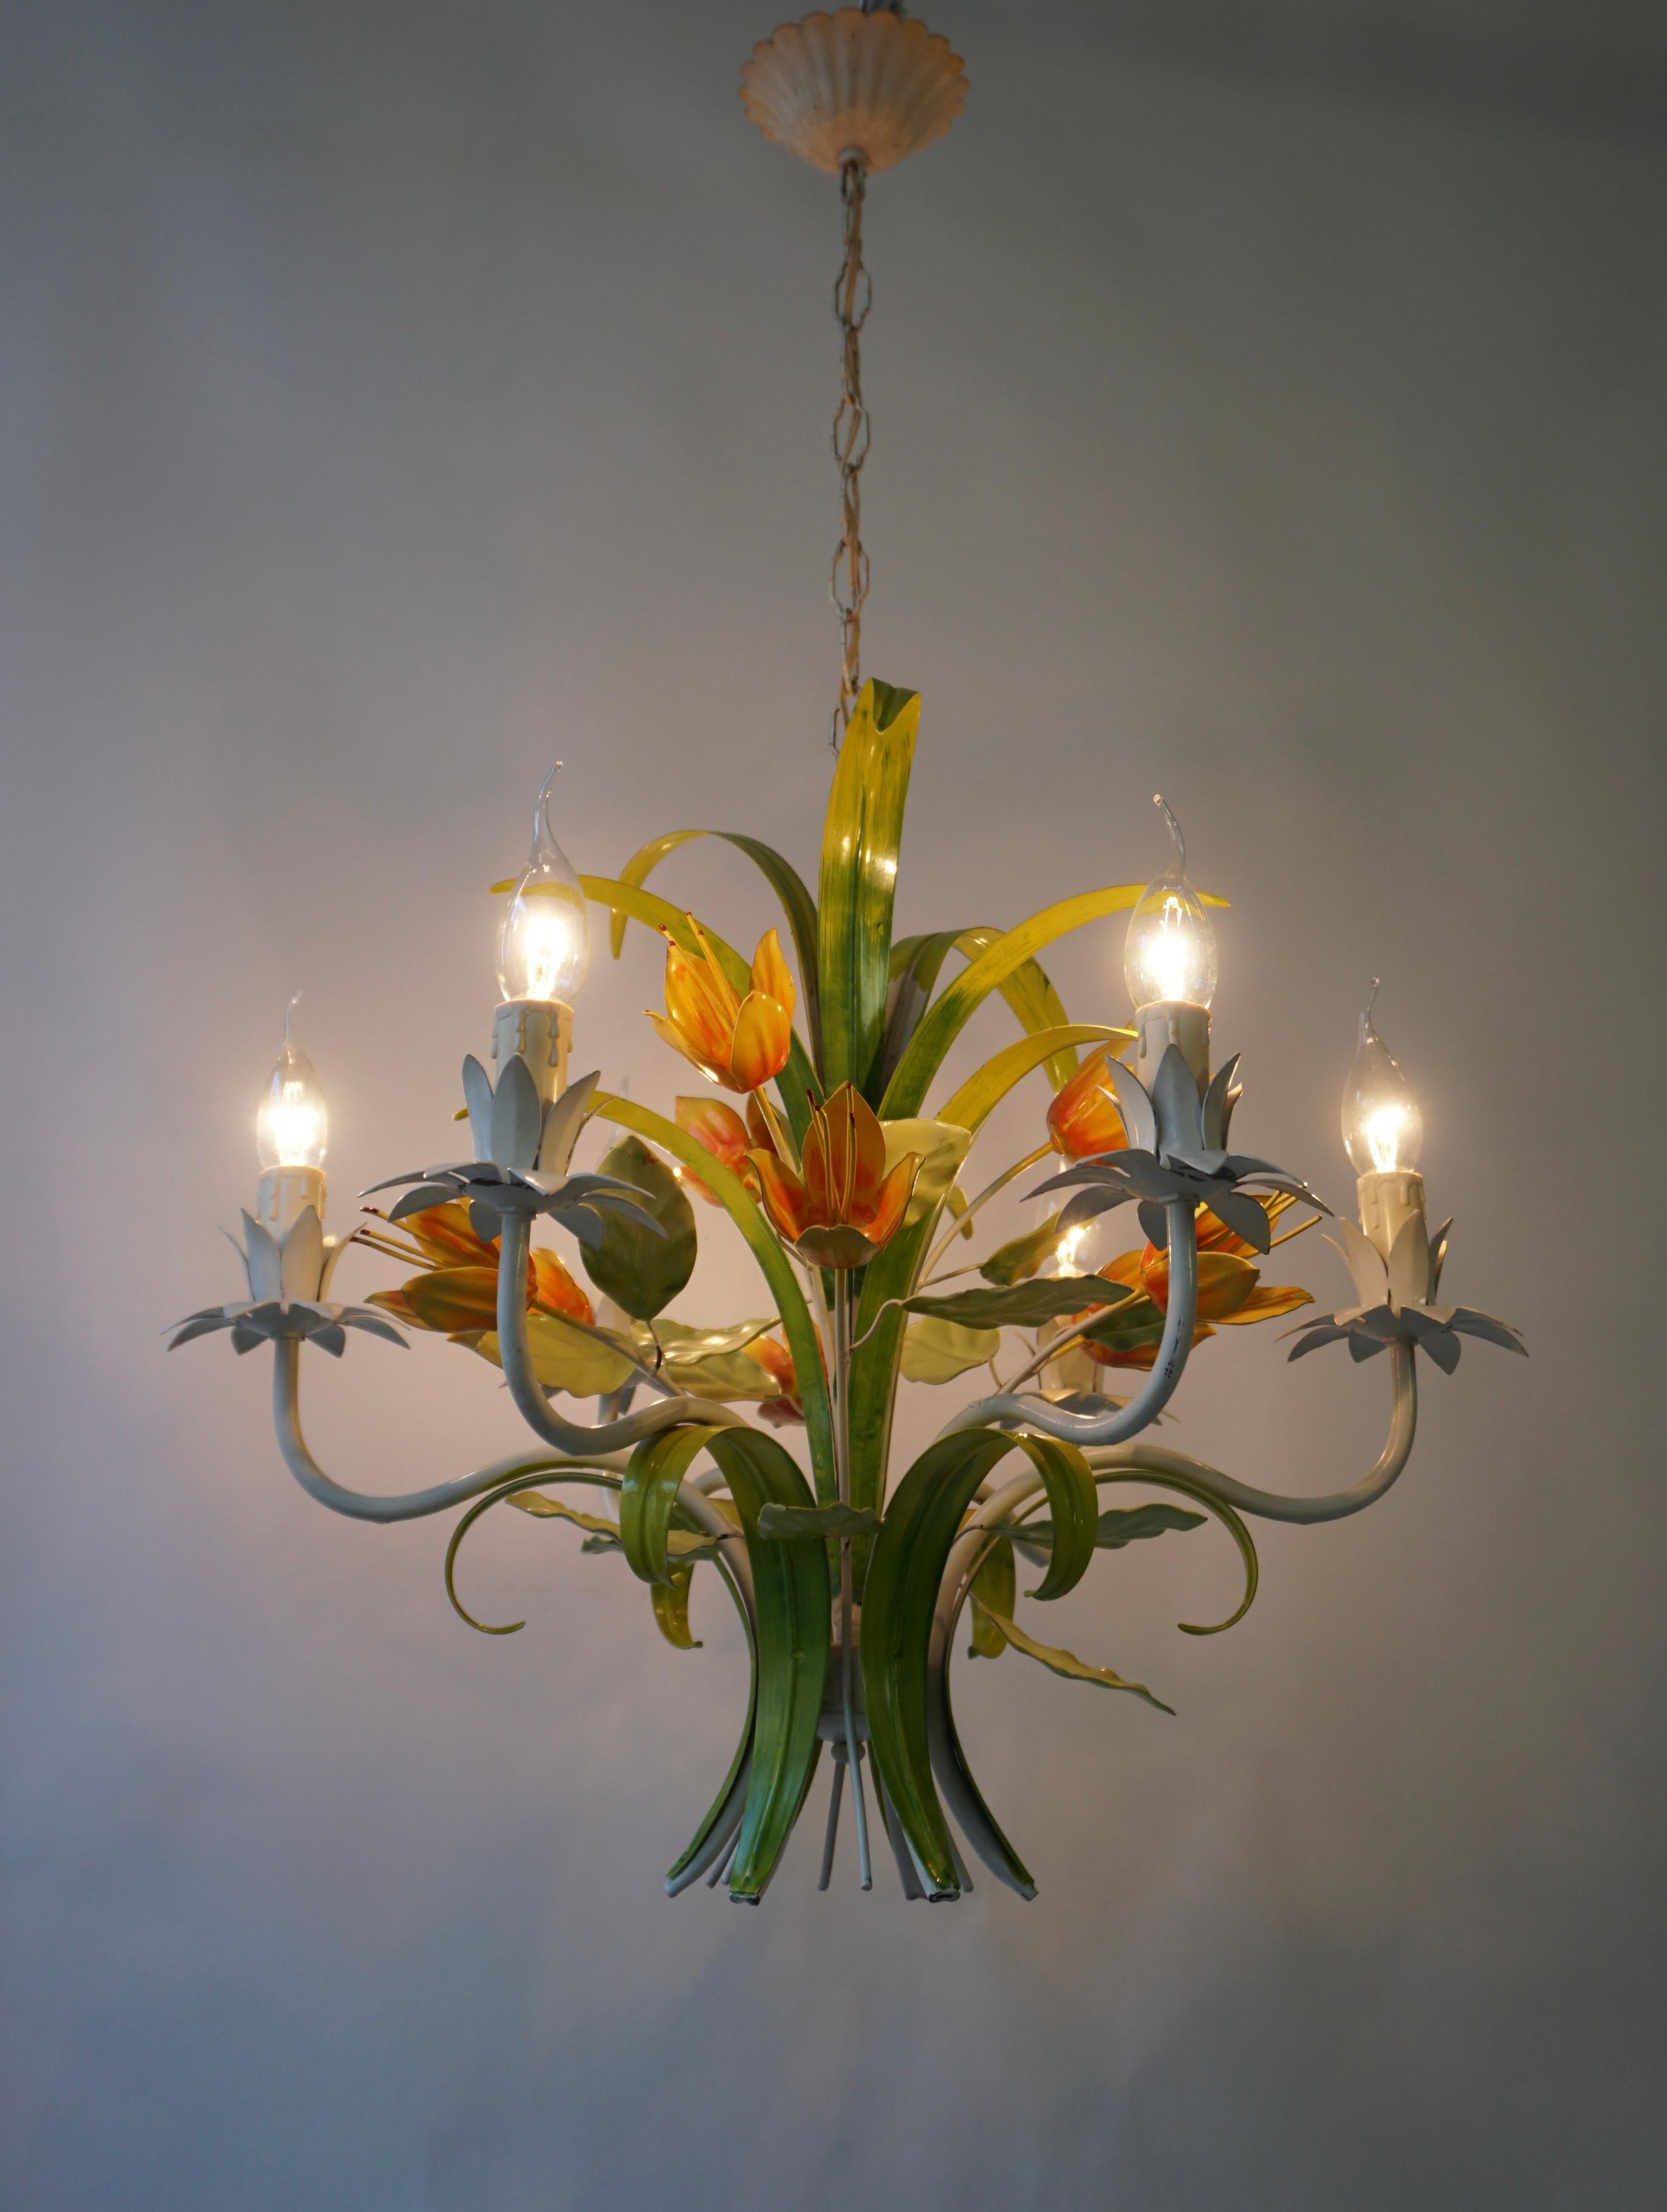 Absolutely beautiful tole painted chandelier Made in the 1960s in Italy. Beautiful bright colors ar used to give this chandelier her fresh appearance and character.

The total height including the chain is 36